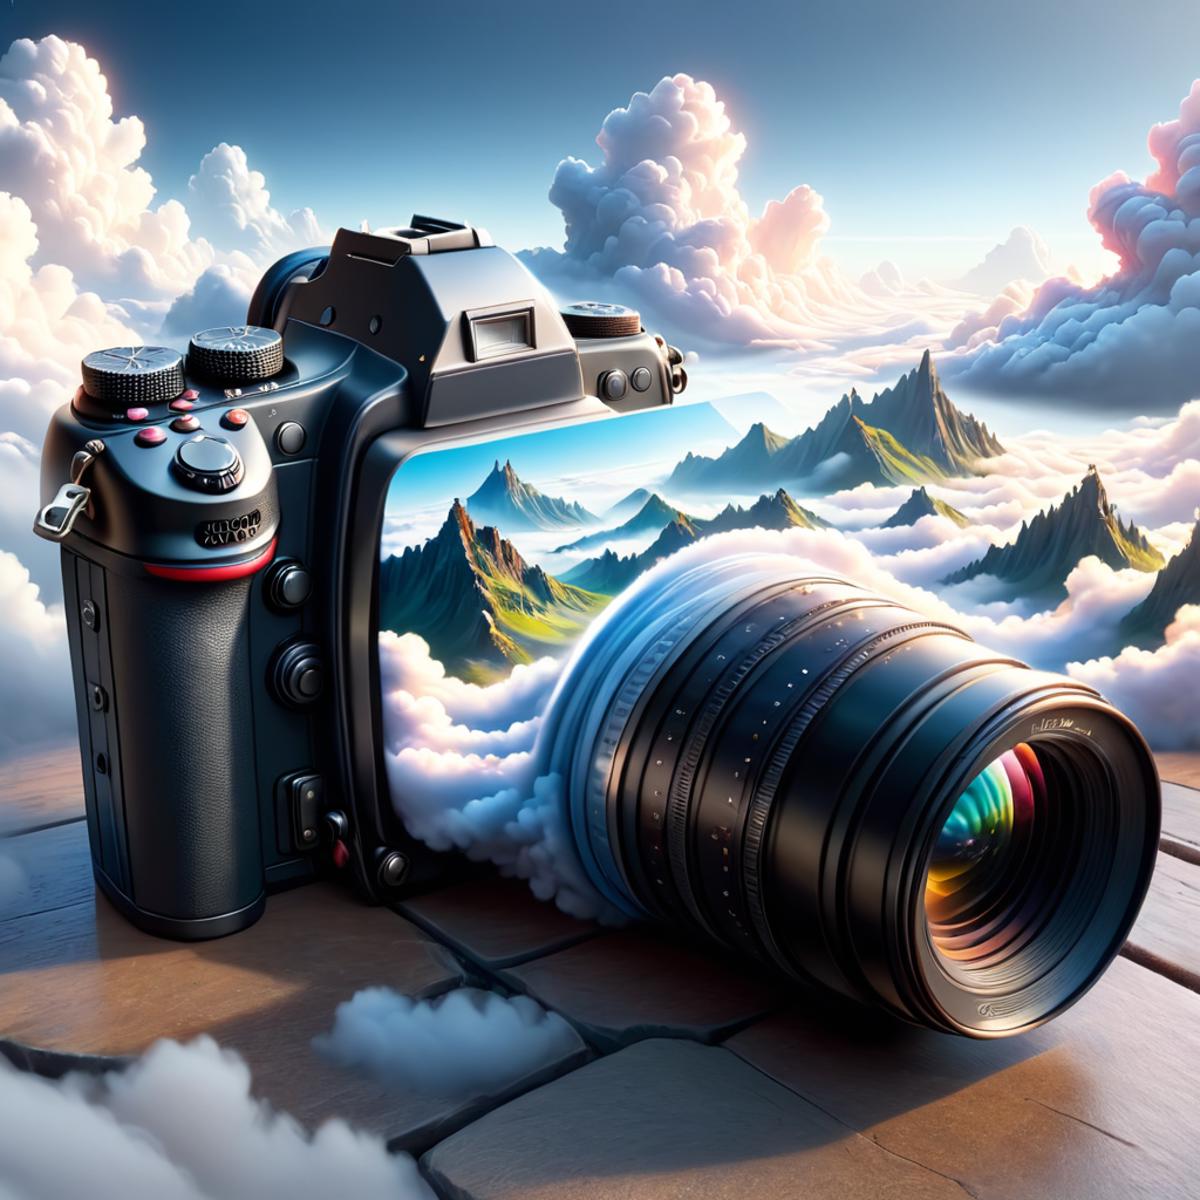 Artistic Rendering of a Camera with a Mountain Background